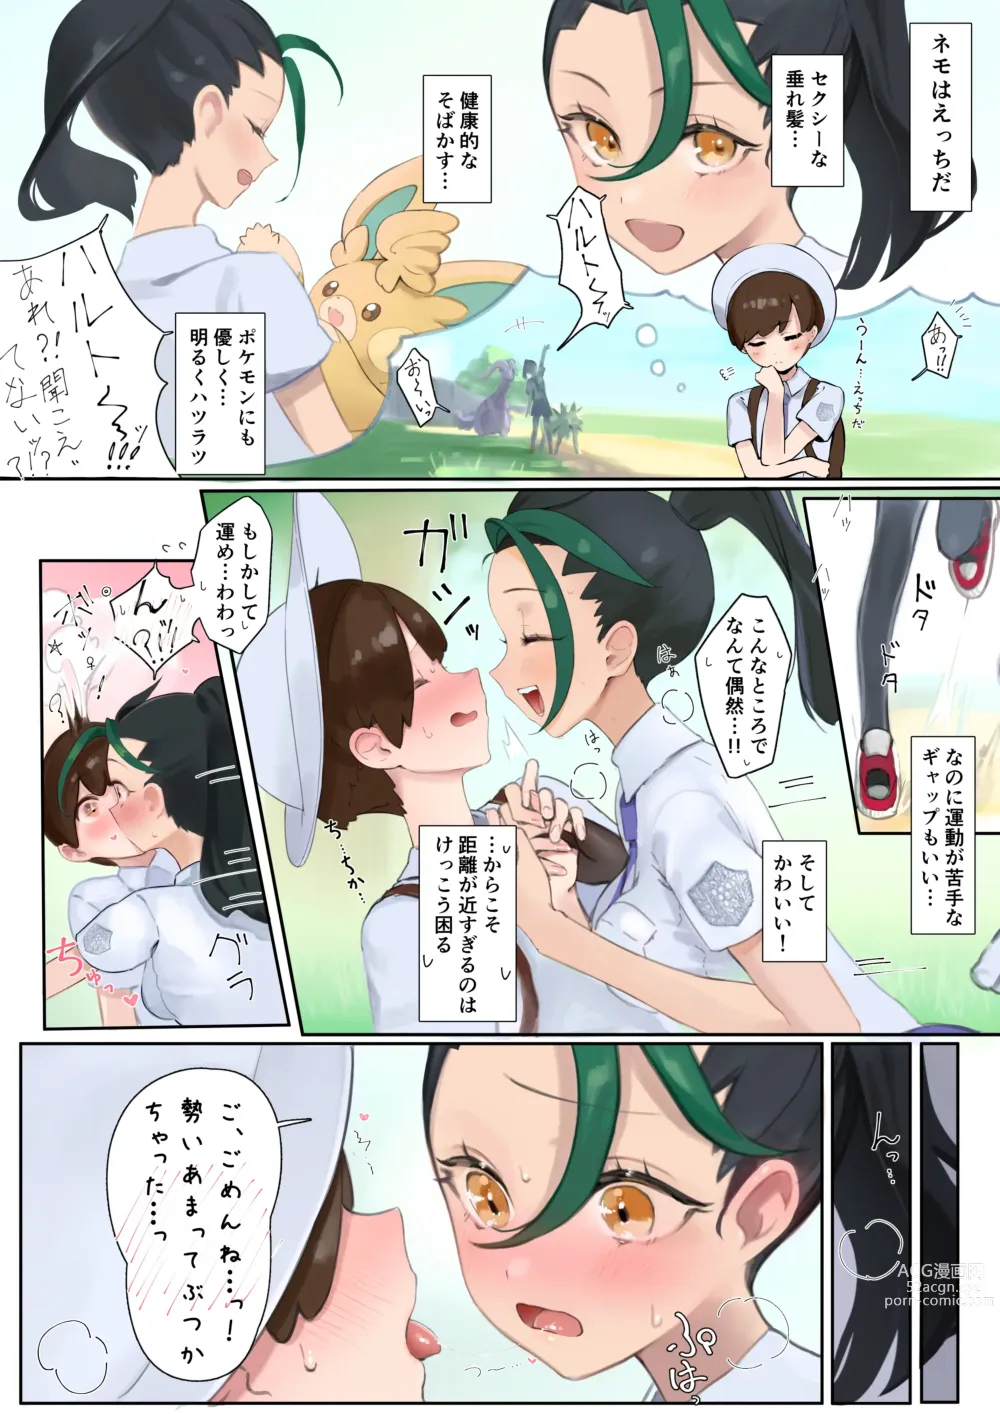 Page 1 of imageset 猫の幼虫